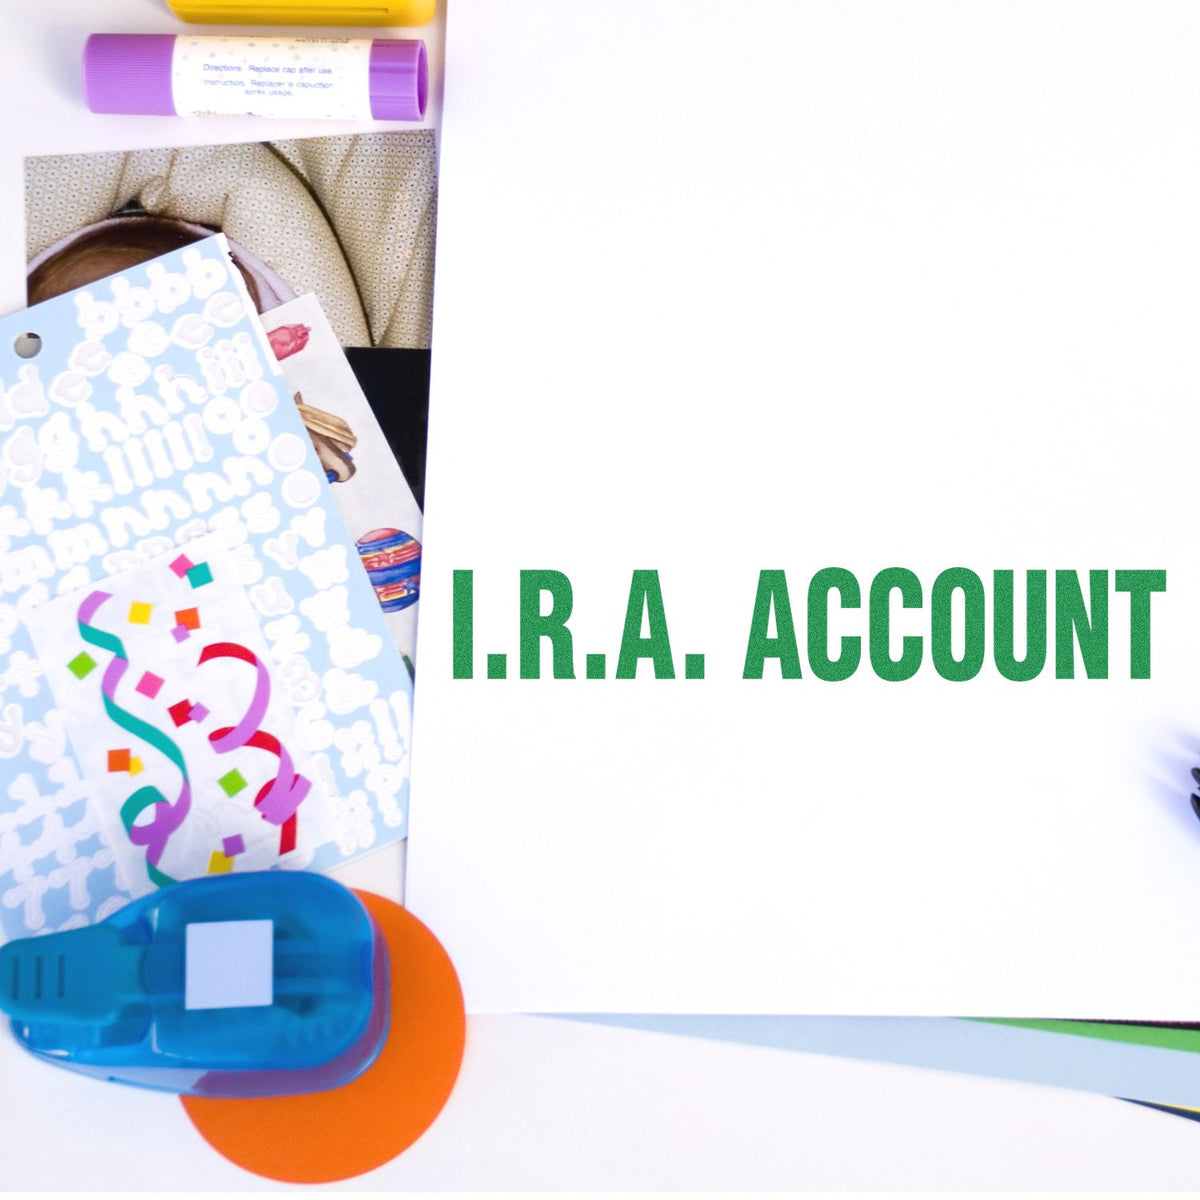 Large I.R.A. Account Rubber Stamp In Use